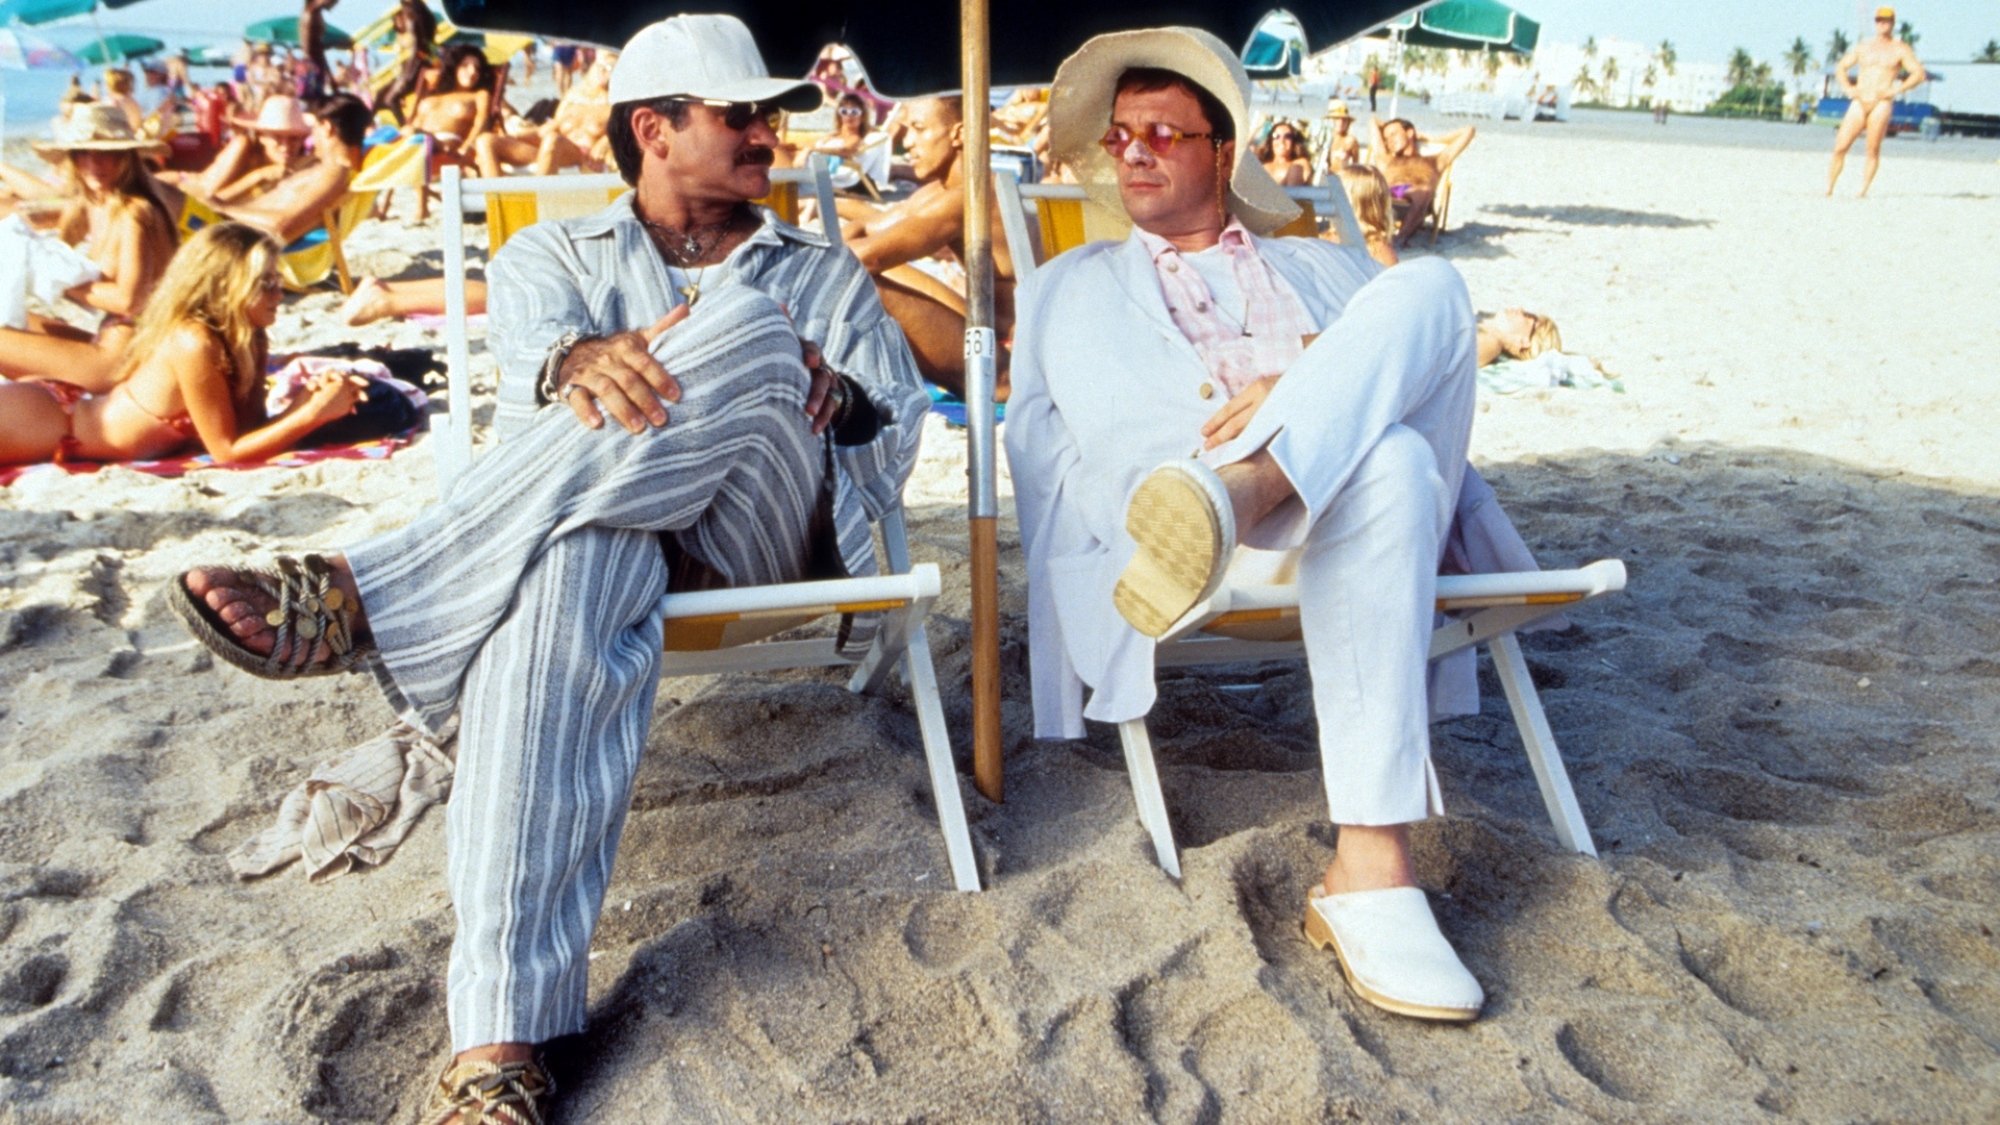 Robin Williams and Nathan Lane in "The Birdcage."